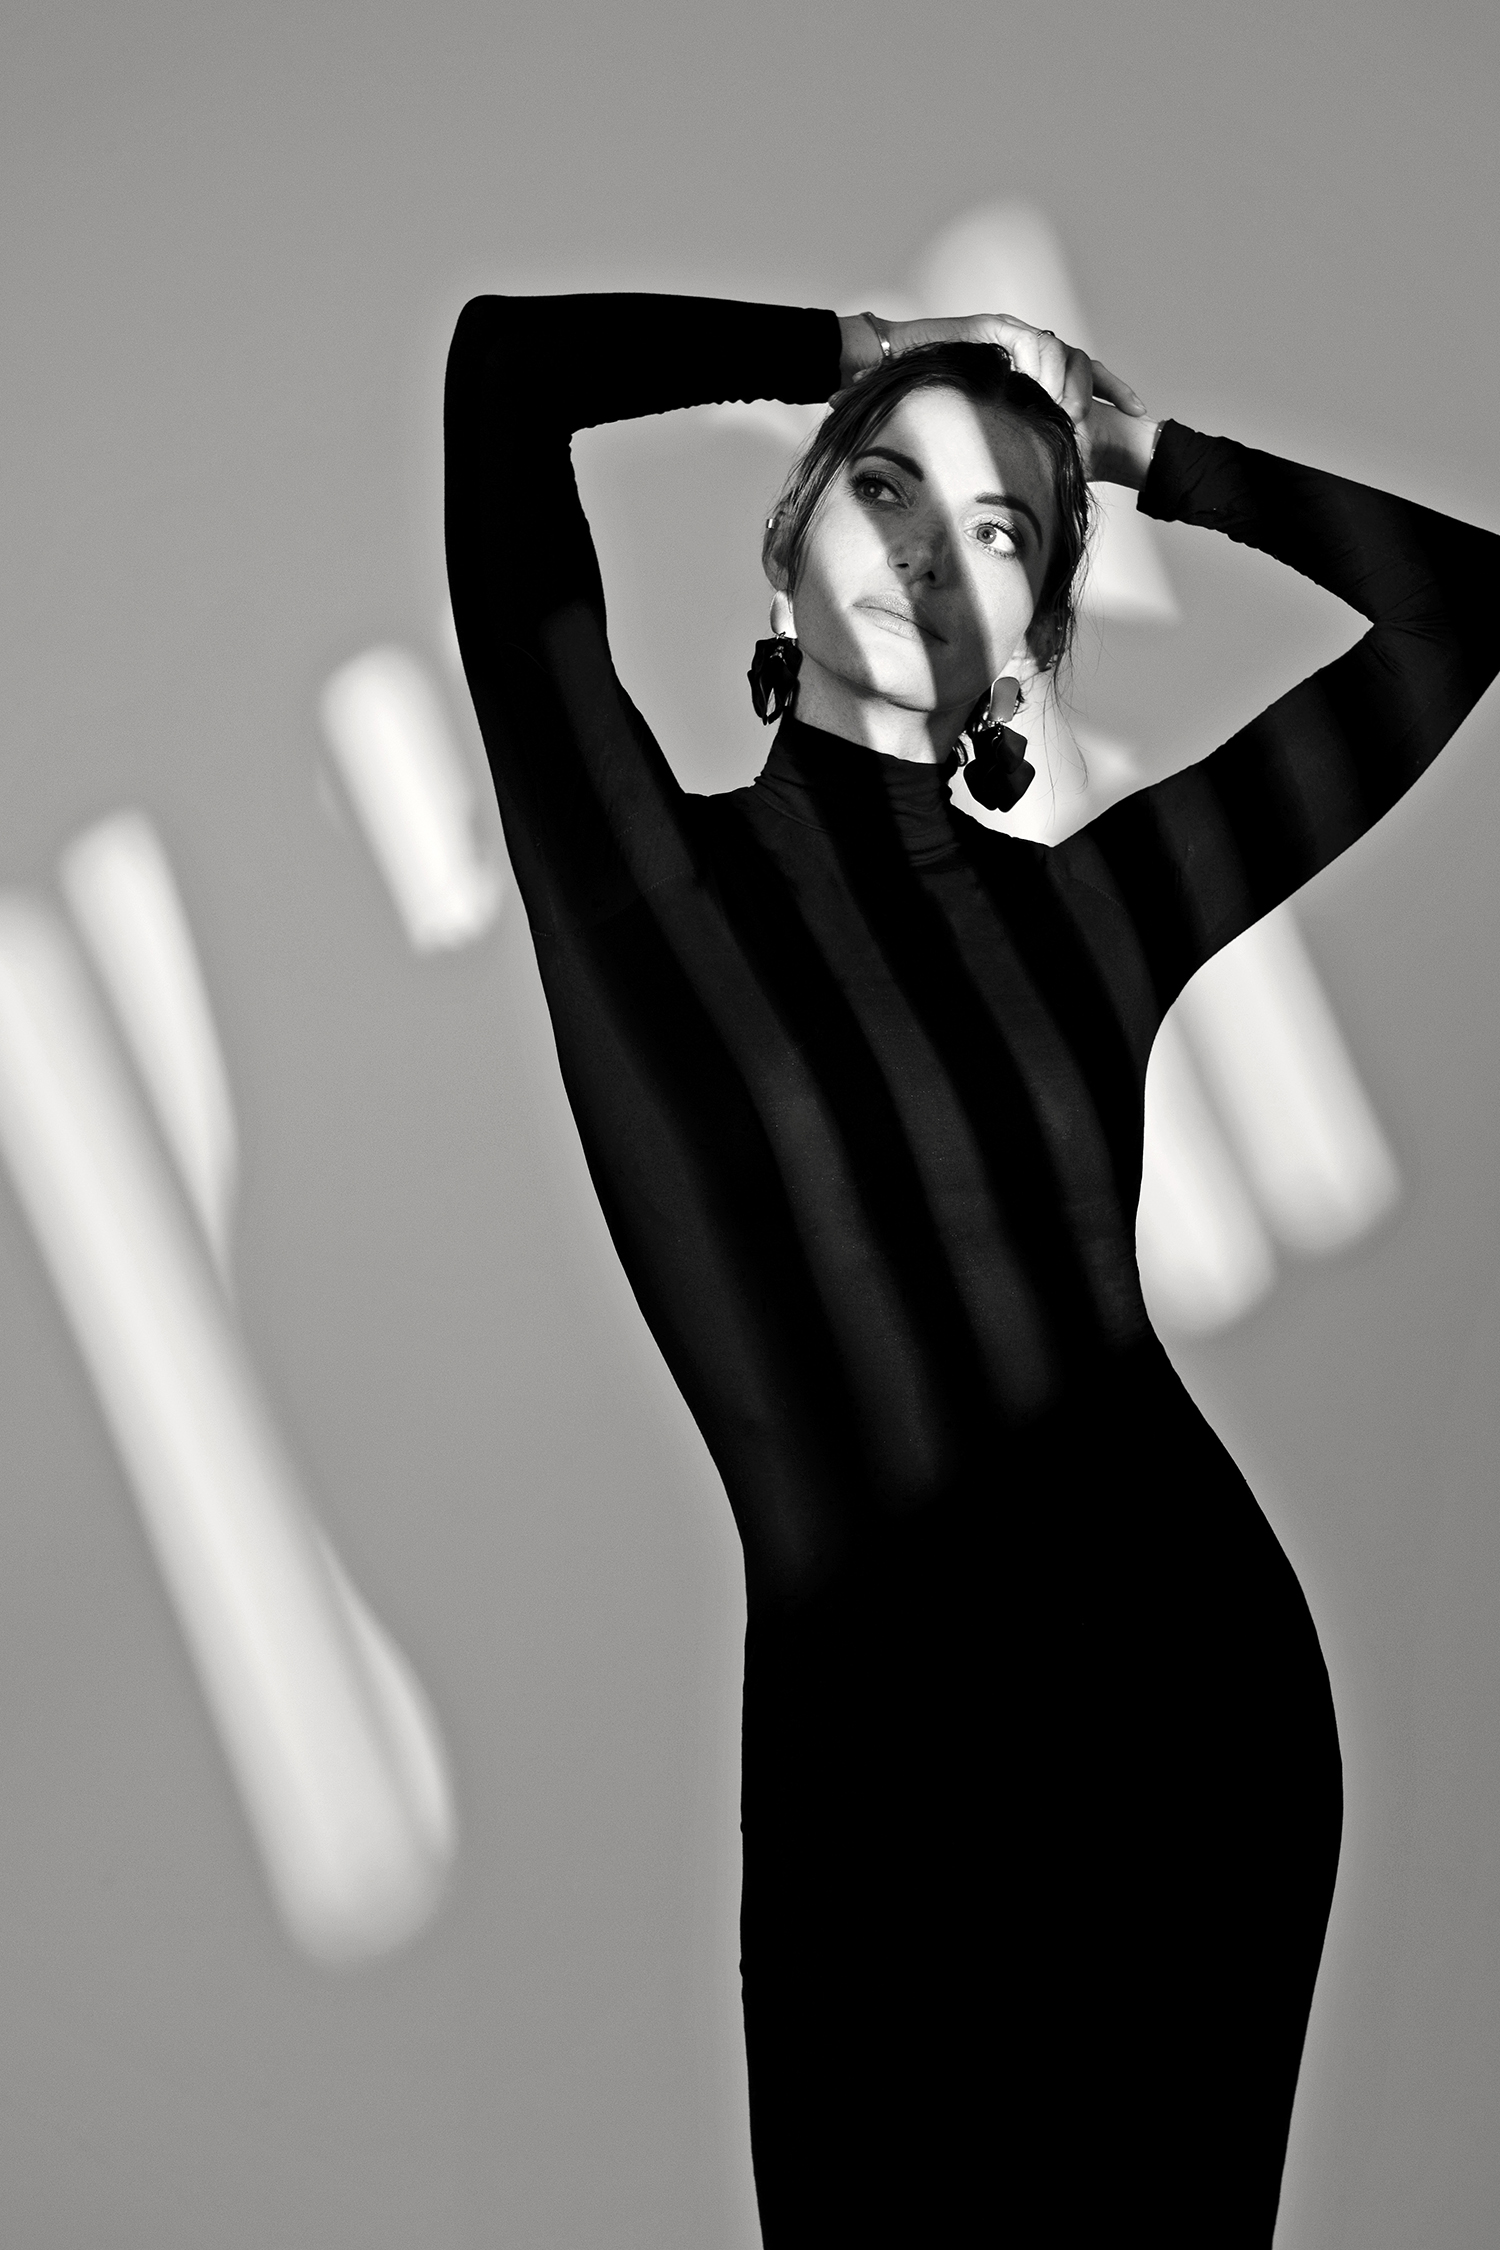 black and white fashion image of woman in black dress and dramatic lighting